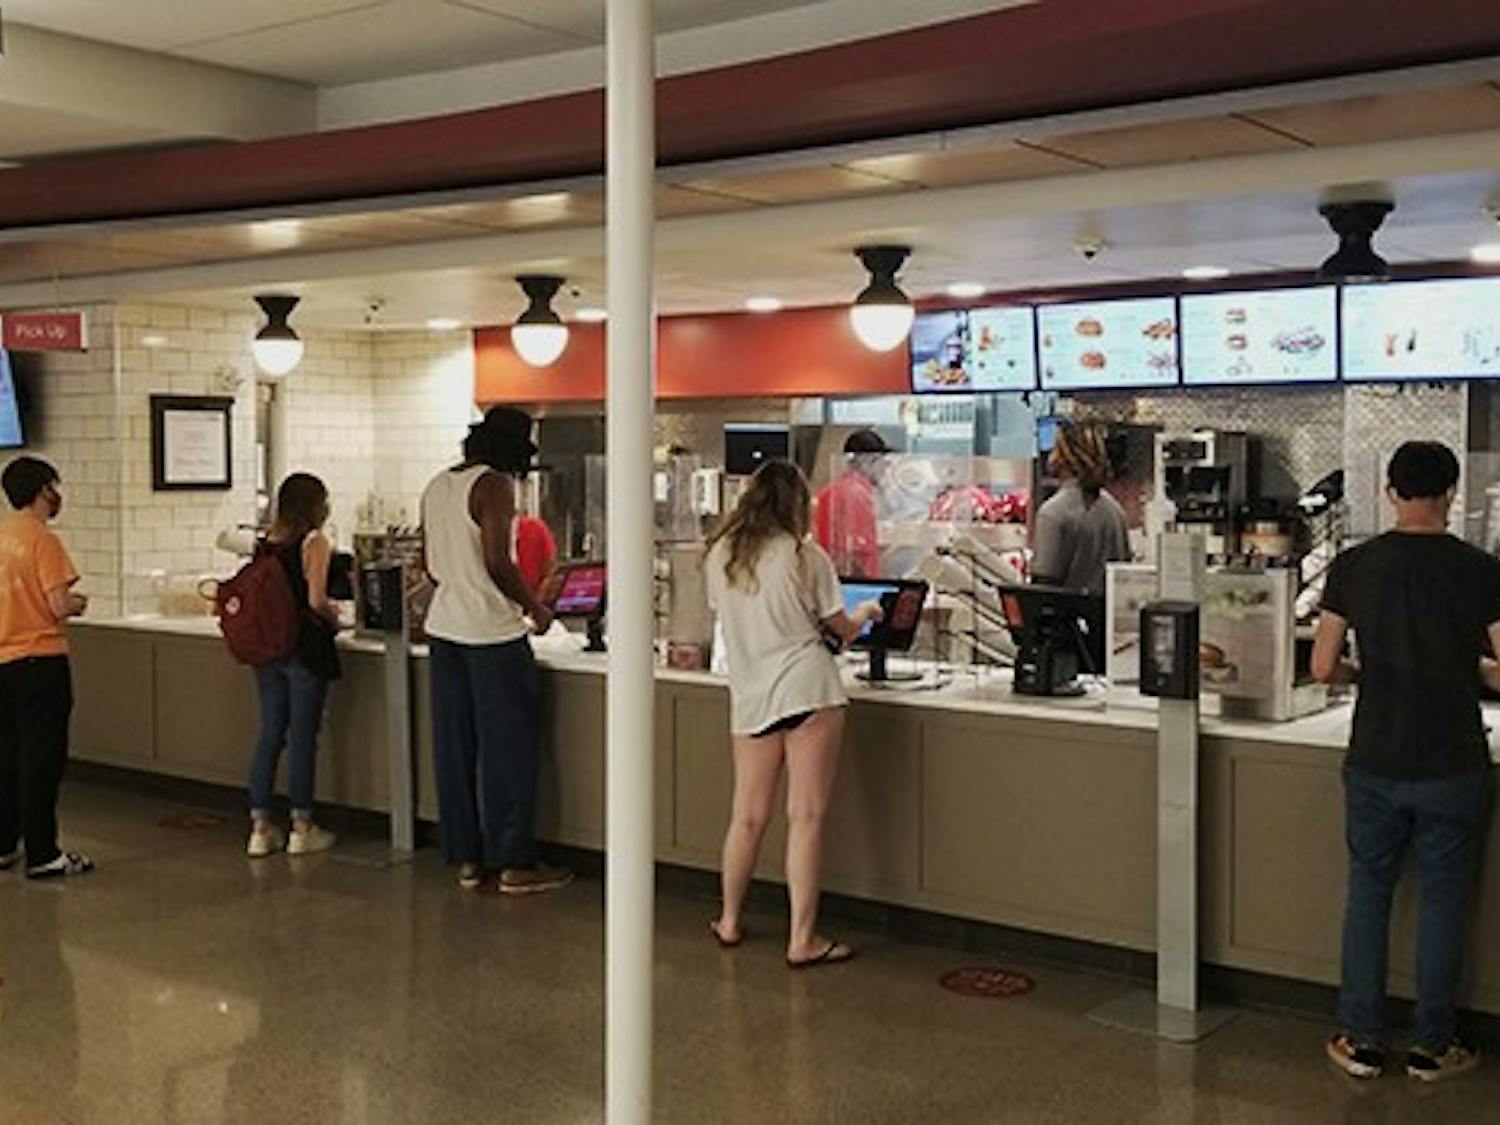 The Chick-fil-A in Russell House. This is one of the most popular eating destinations for students on campus.